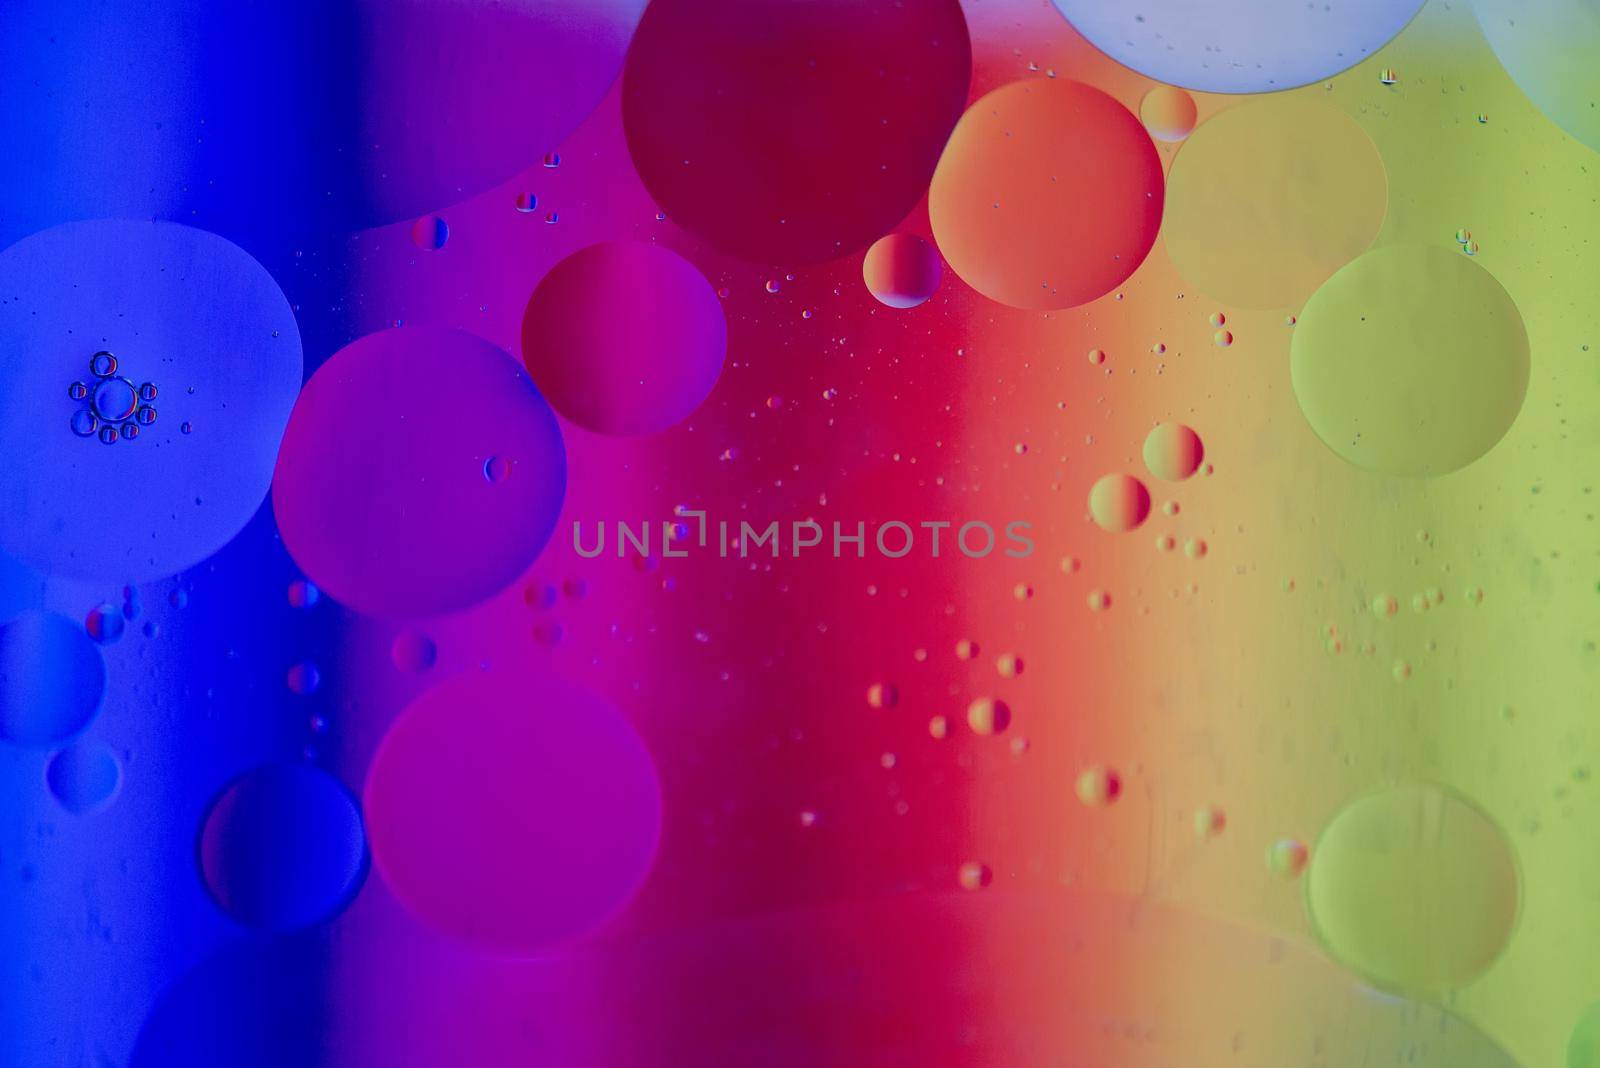 Oil drops in water. Abstract defocused psychedelic pattern image rainbow colored. Abstract background with colorful gradient colors. DOF